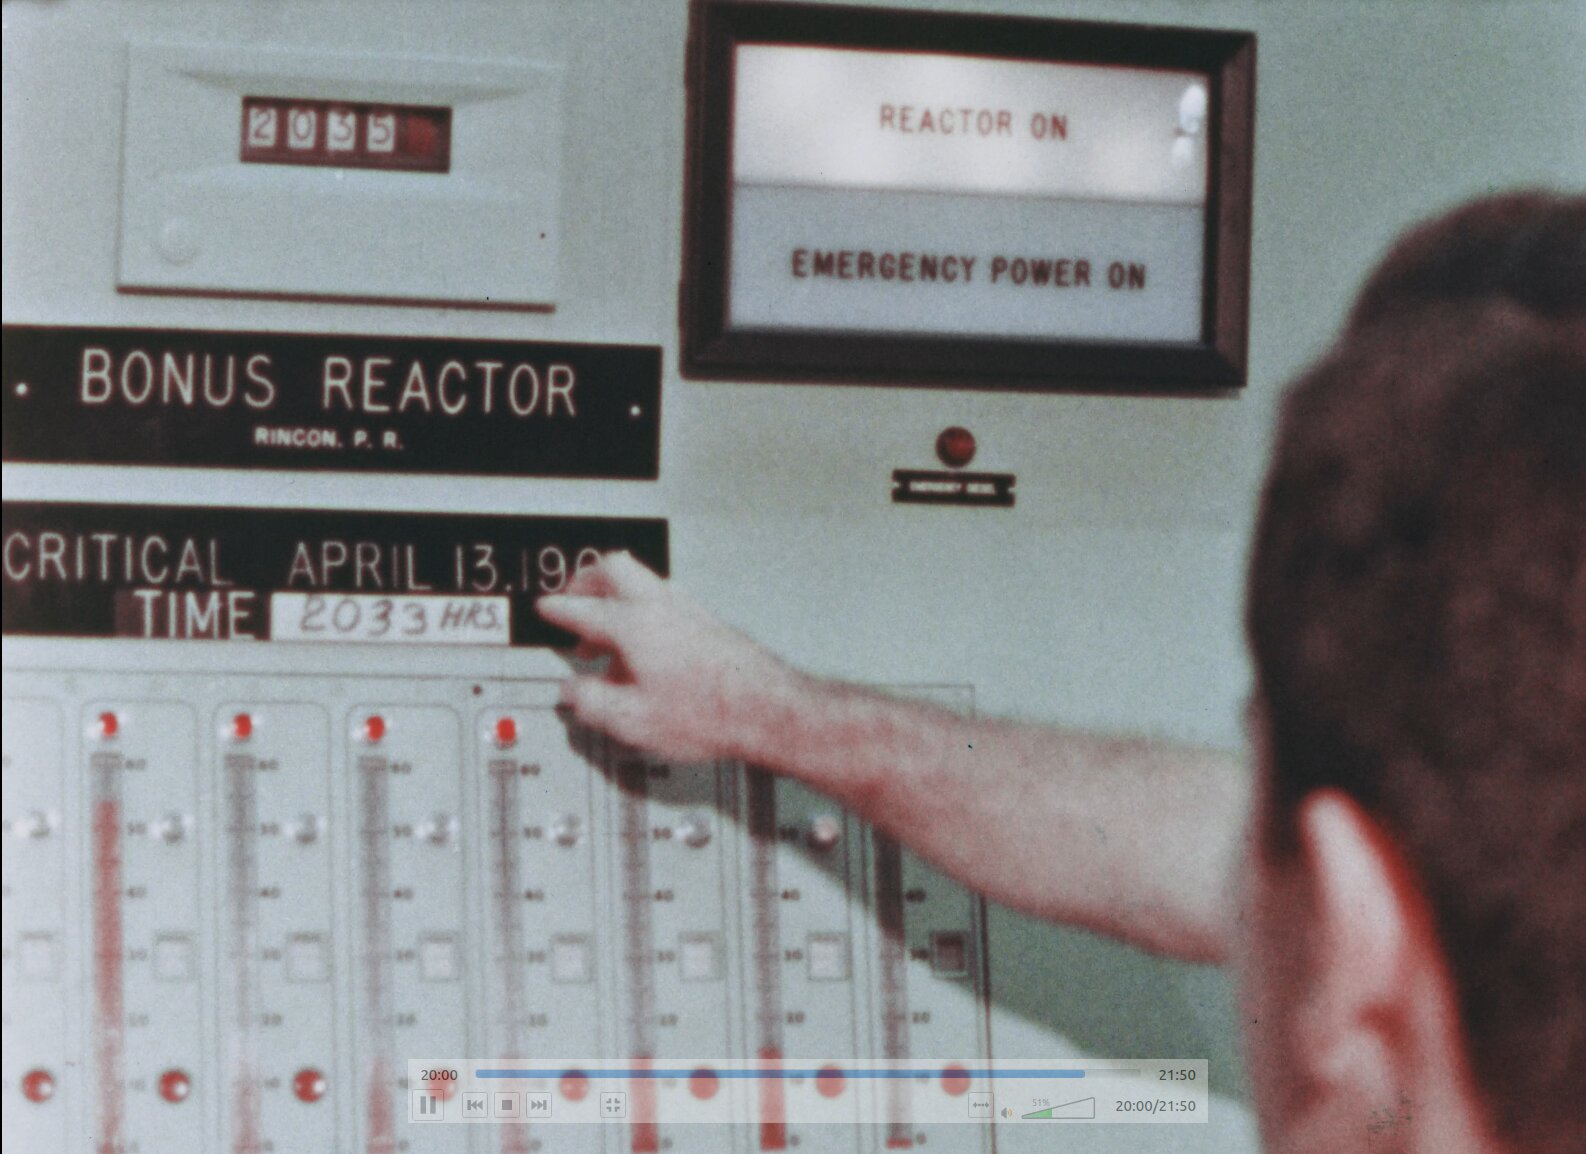 Control room view showing placard about BONUS going critical on April 13, 1964 at 2033 hours. the REACTOR ON sign is lit.